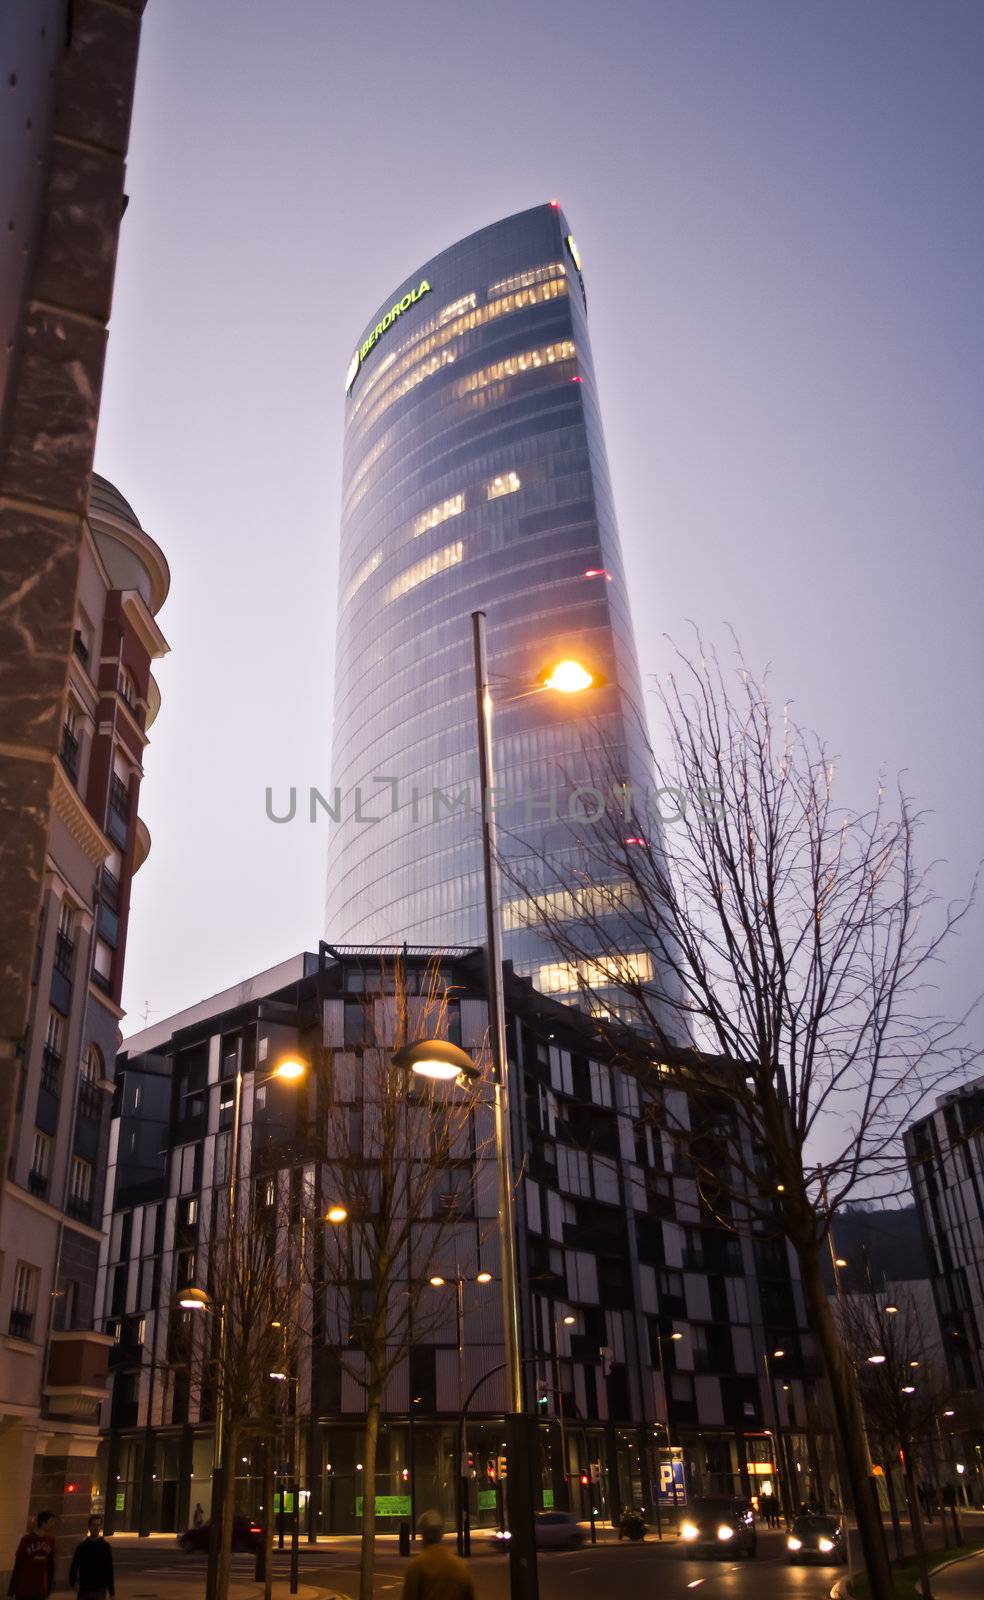 Iberdrola Tower headquarters, in Bilbao, Spain, on March 30, 2012. The tower was designed by architect César Pelli in 2011.